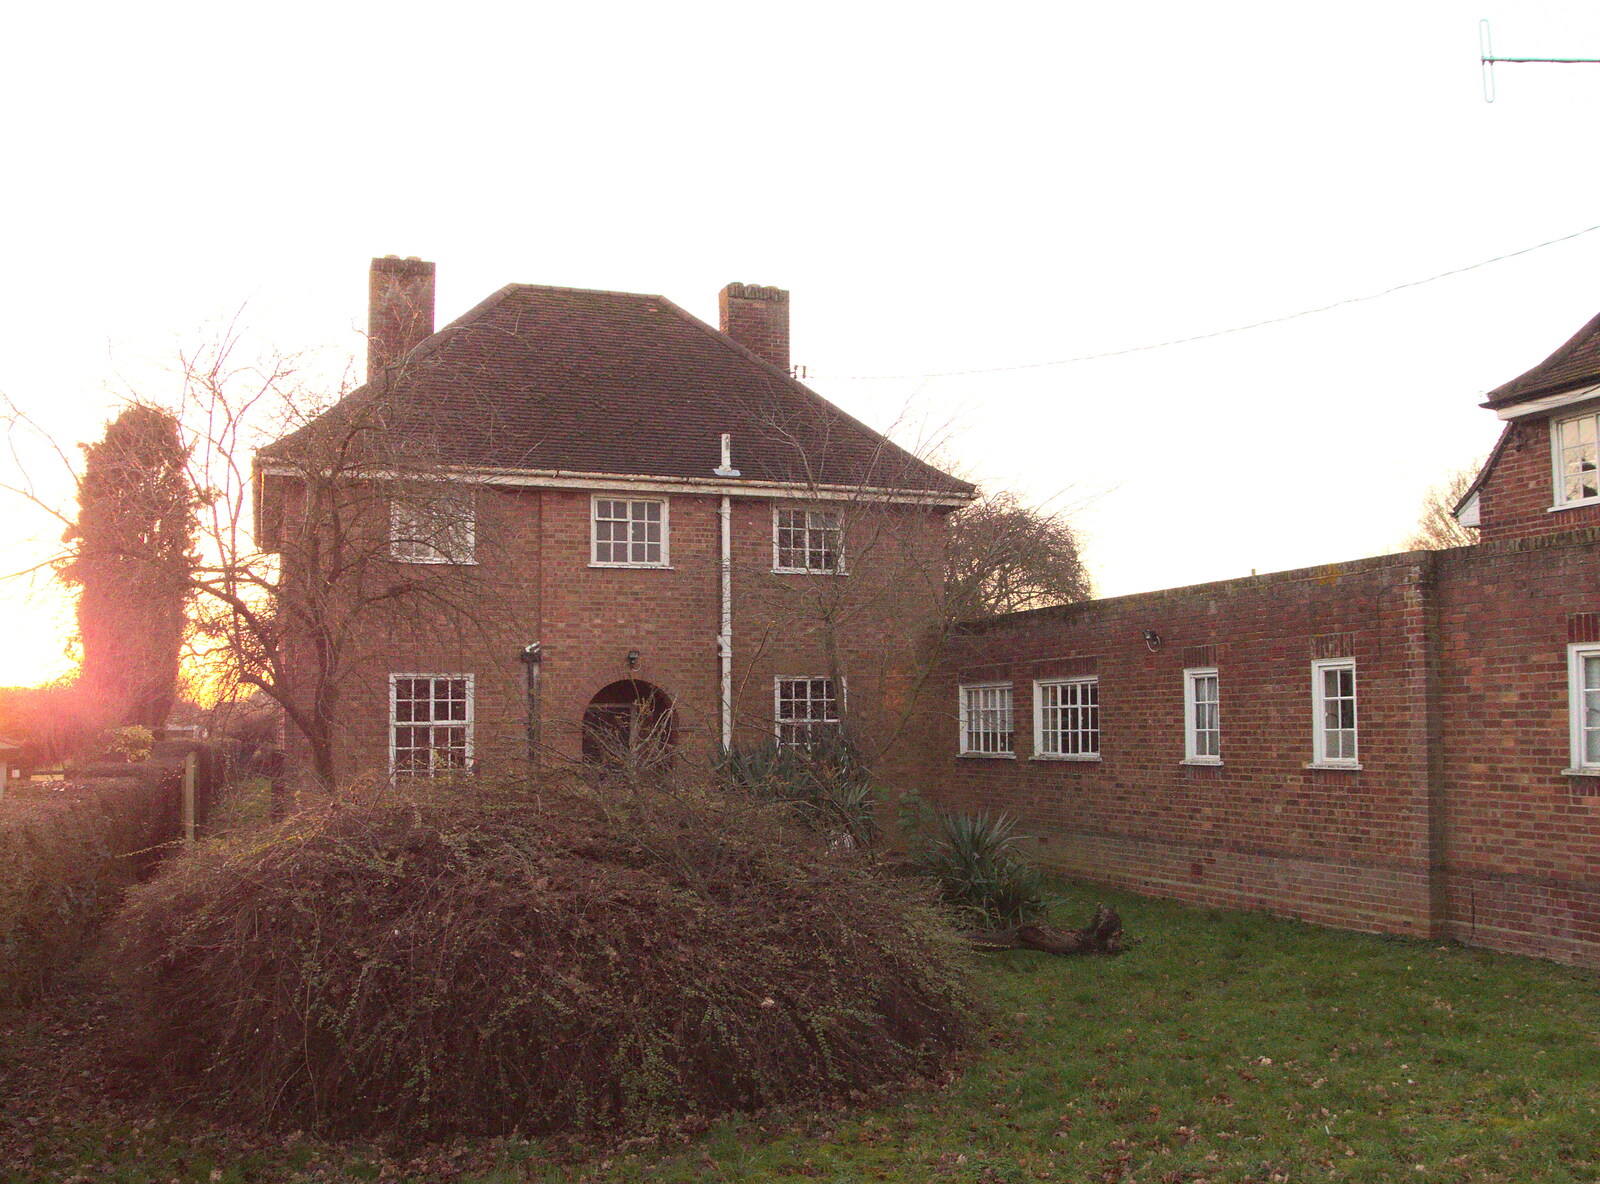 The other officer's quarters from Closing Down: A Late January Miscellany, Diss, Norfolk - 31st January 2015